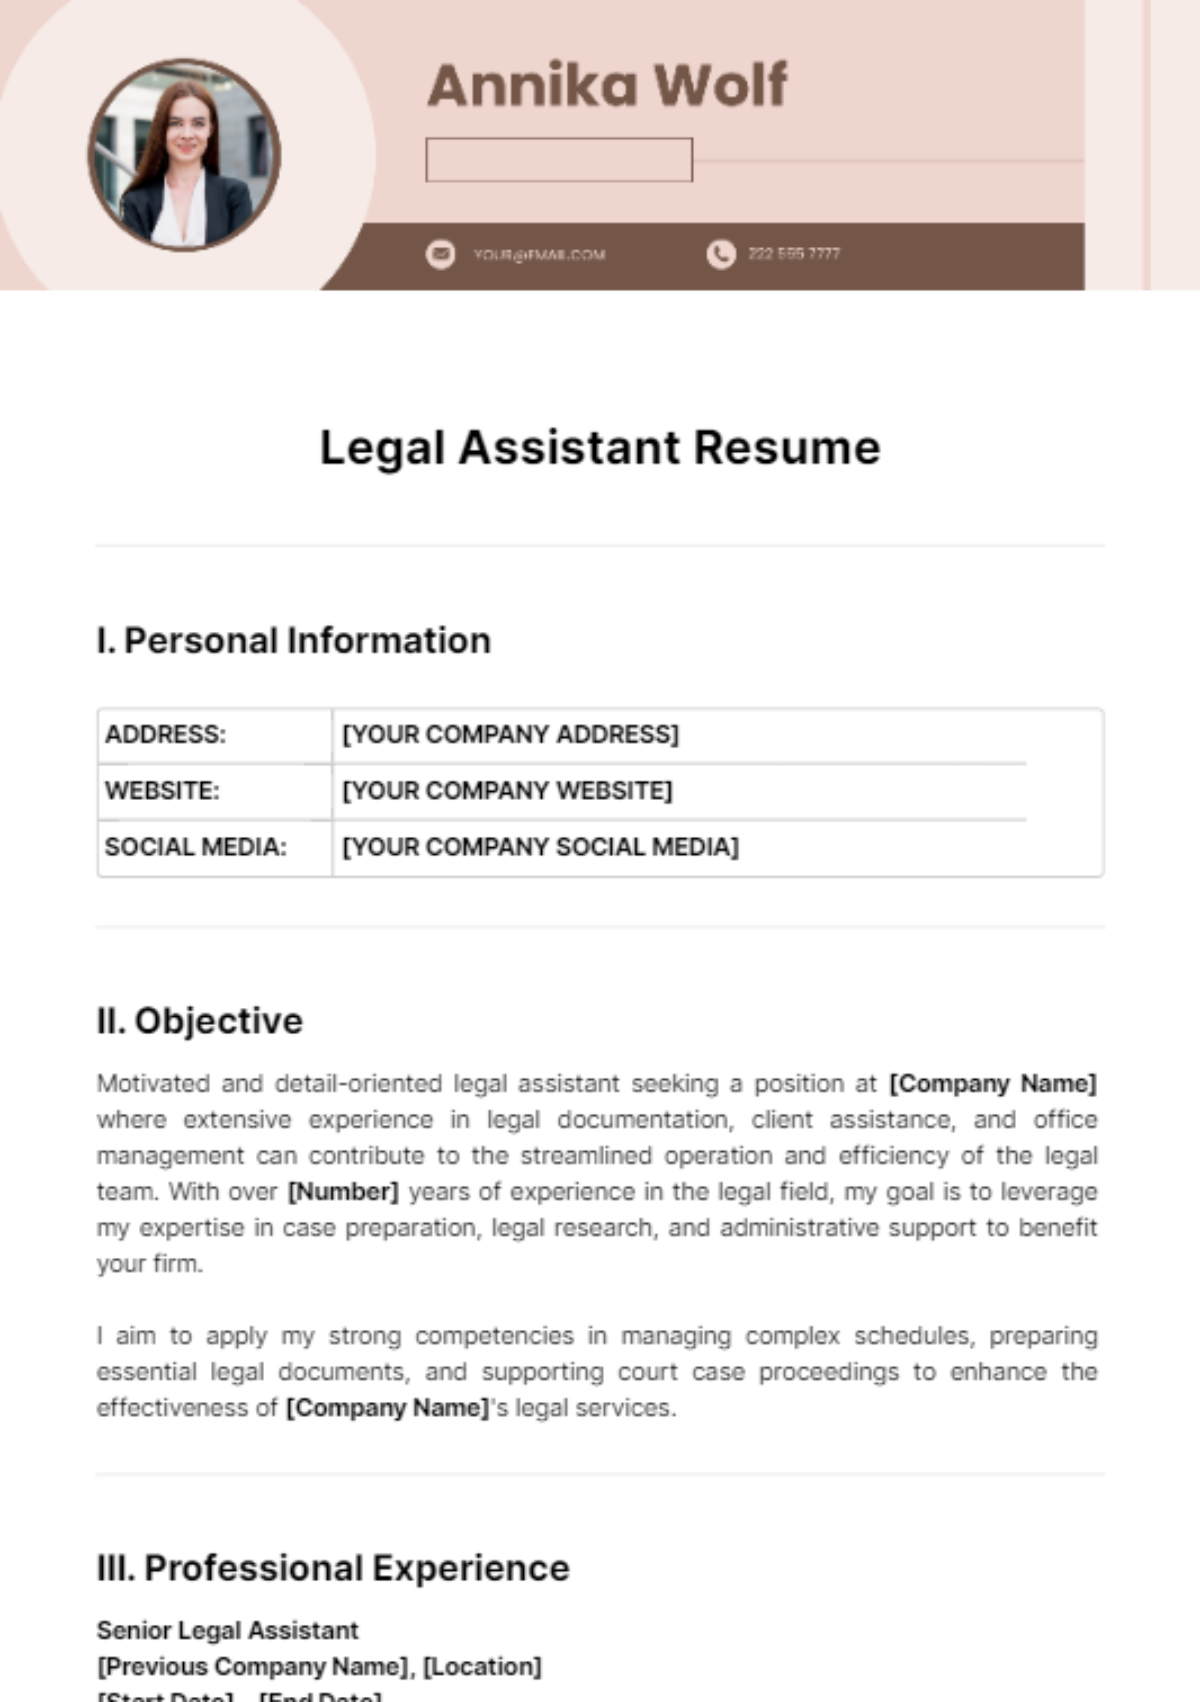 Legal Assistant Resume Template